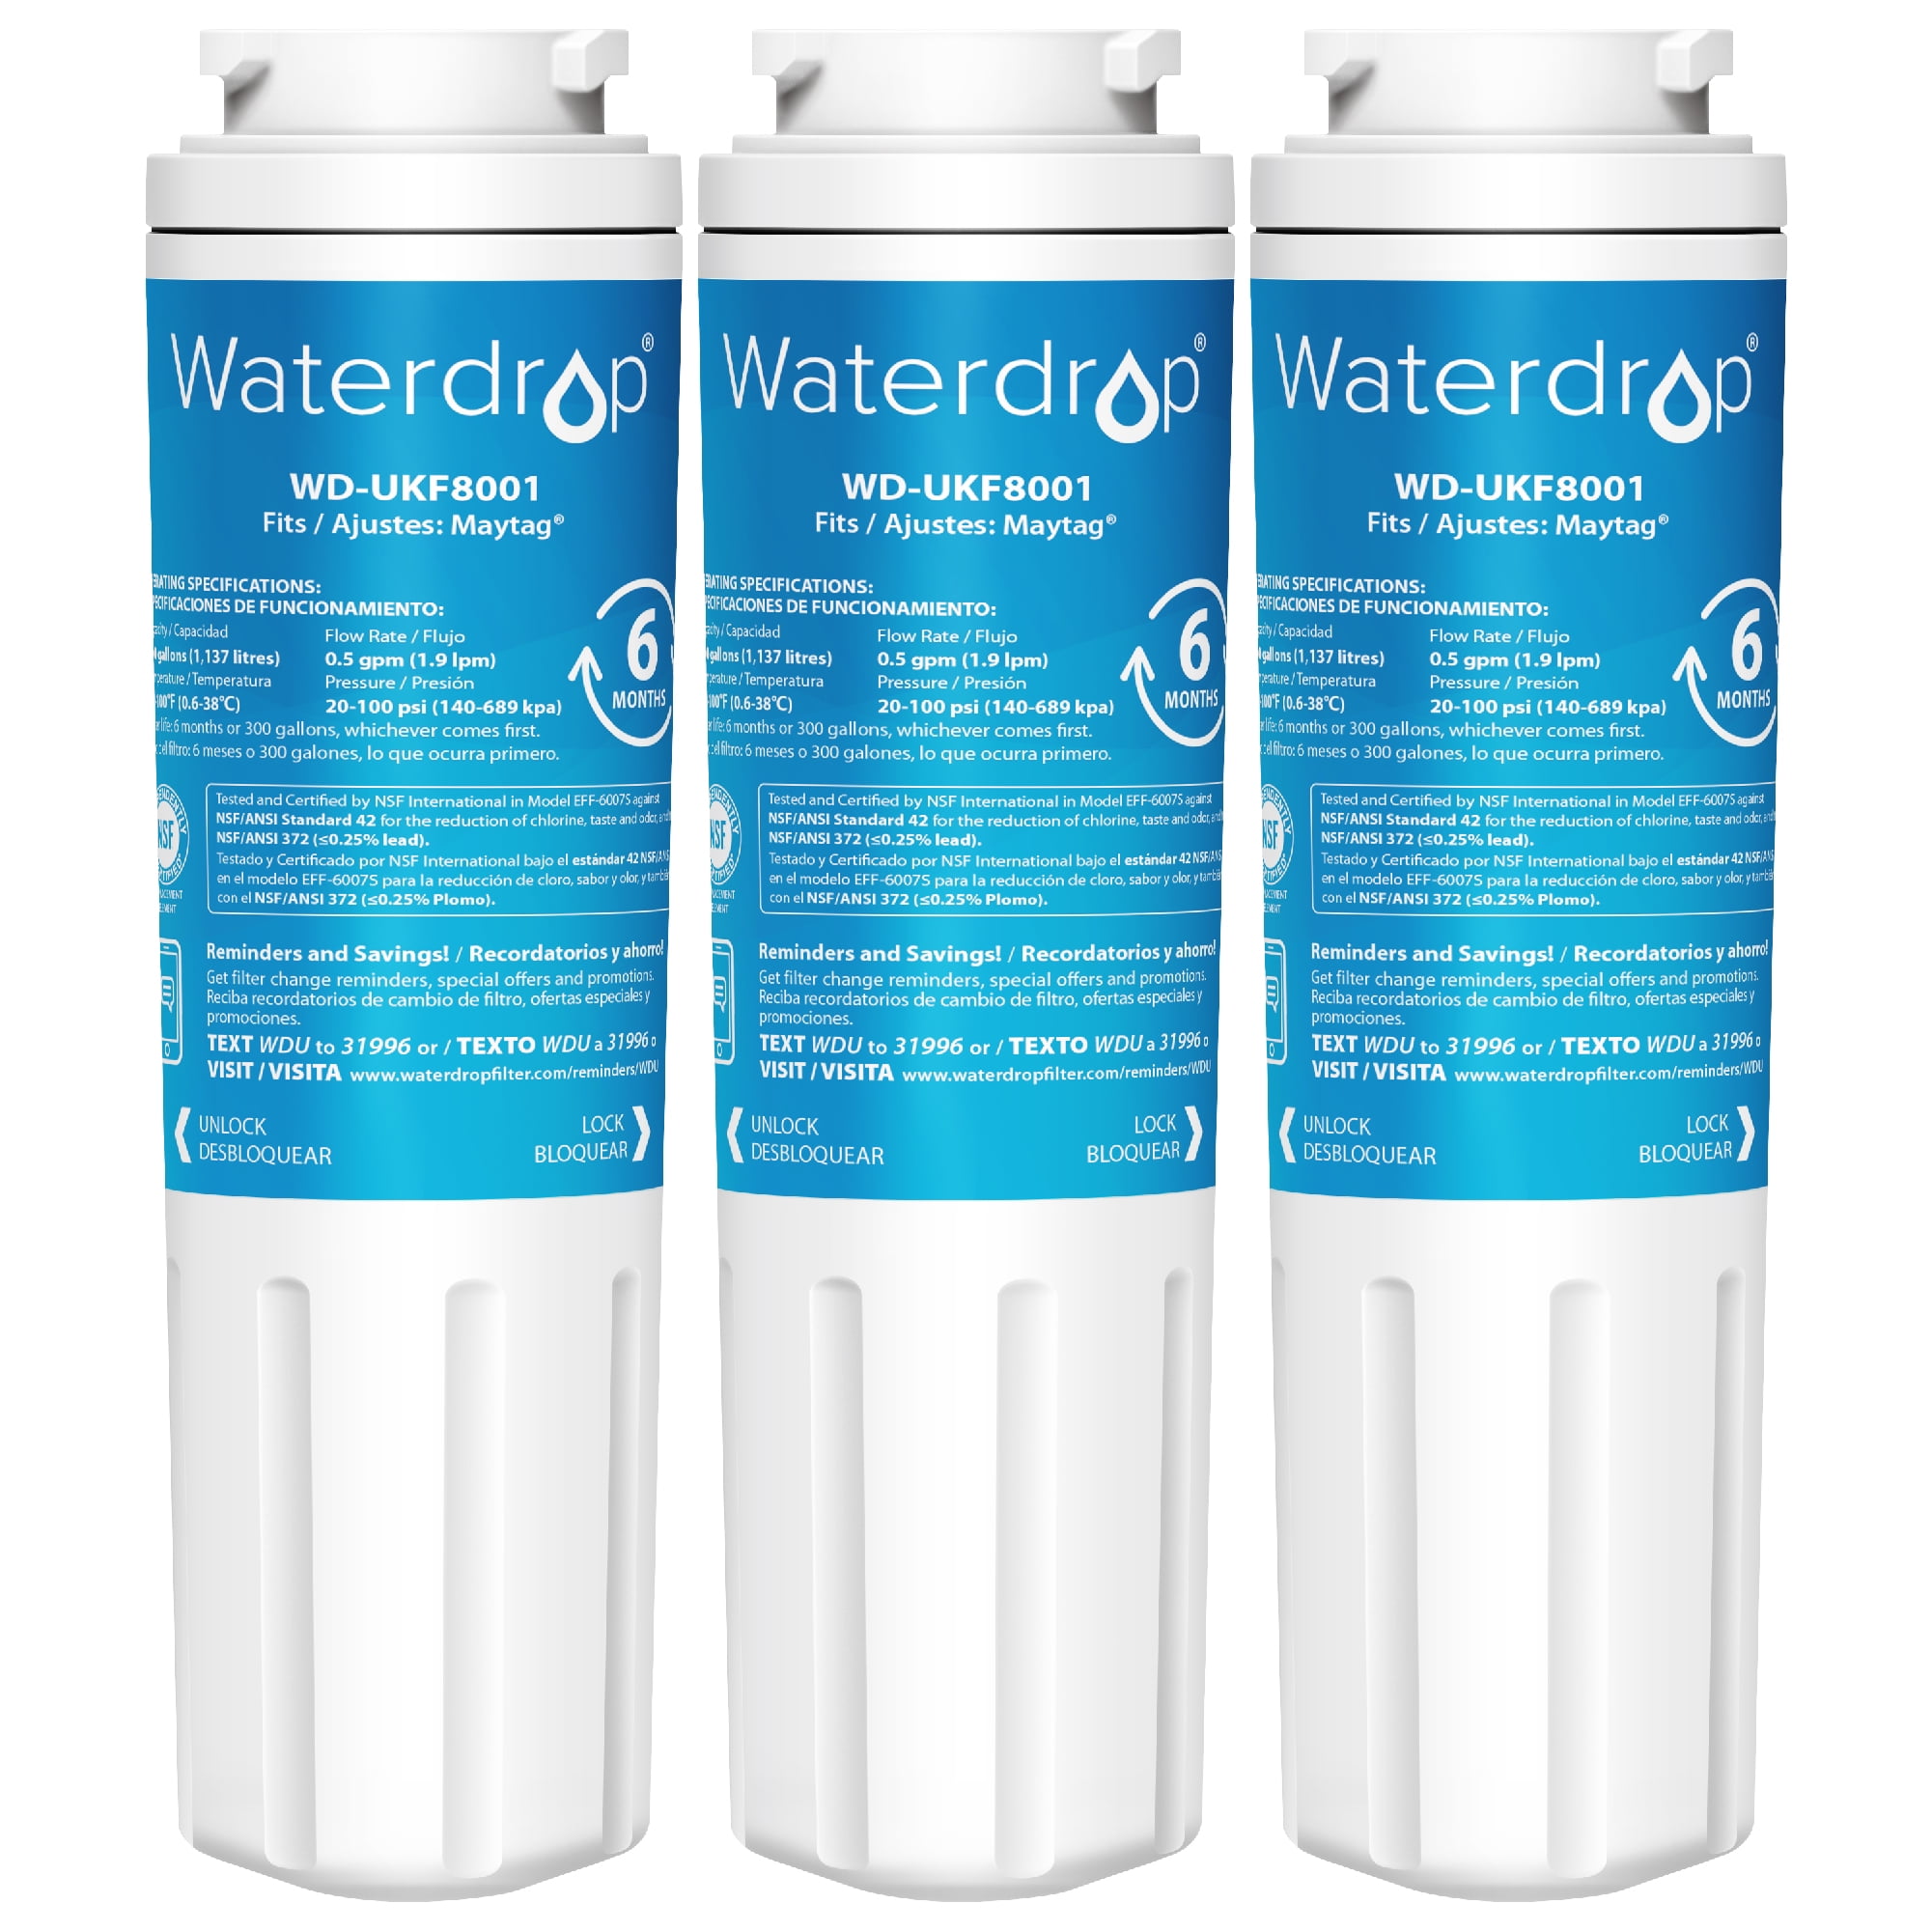 Waterdrop UKF8001 Refrigerator Water Filter, Compatible with Maytag UKF8001AXX-750, UKF8001AXX-200, Whirlpool 4396395, 469006, Filter 4, PUR, Puriclean II, EDR4RXD1, Pack of 3 -New in Box